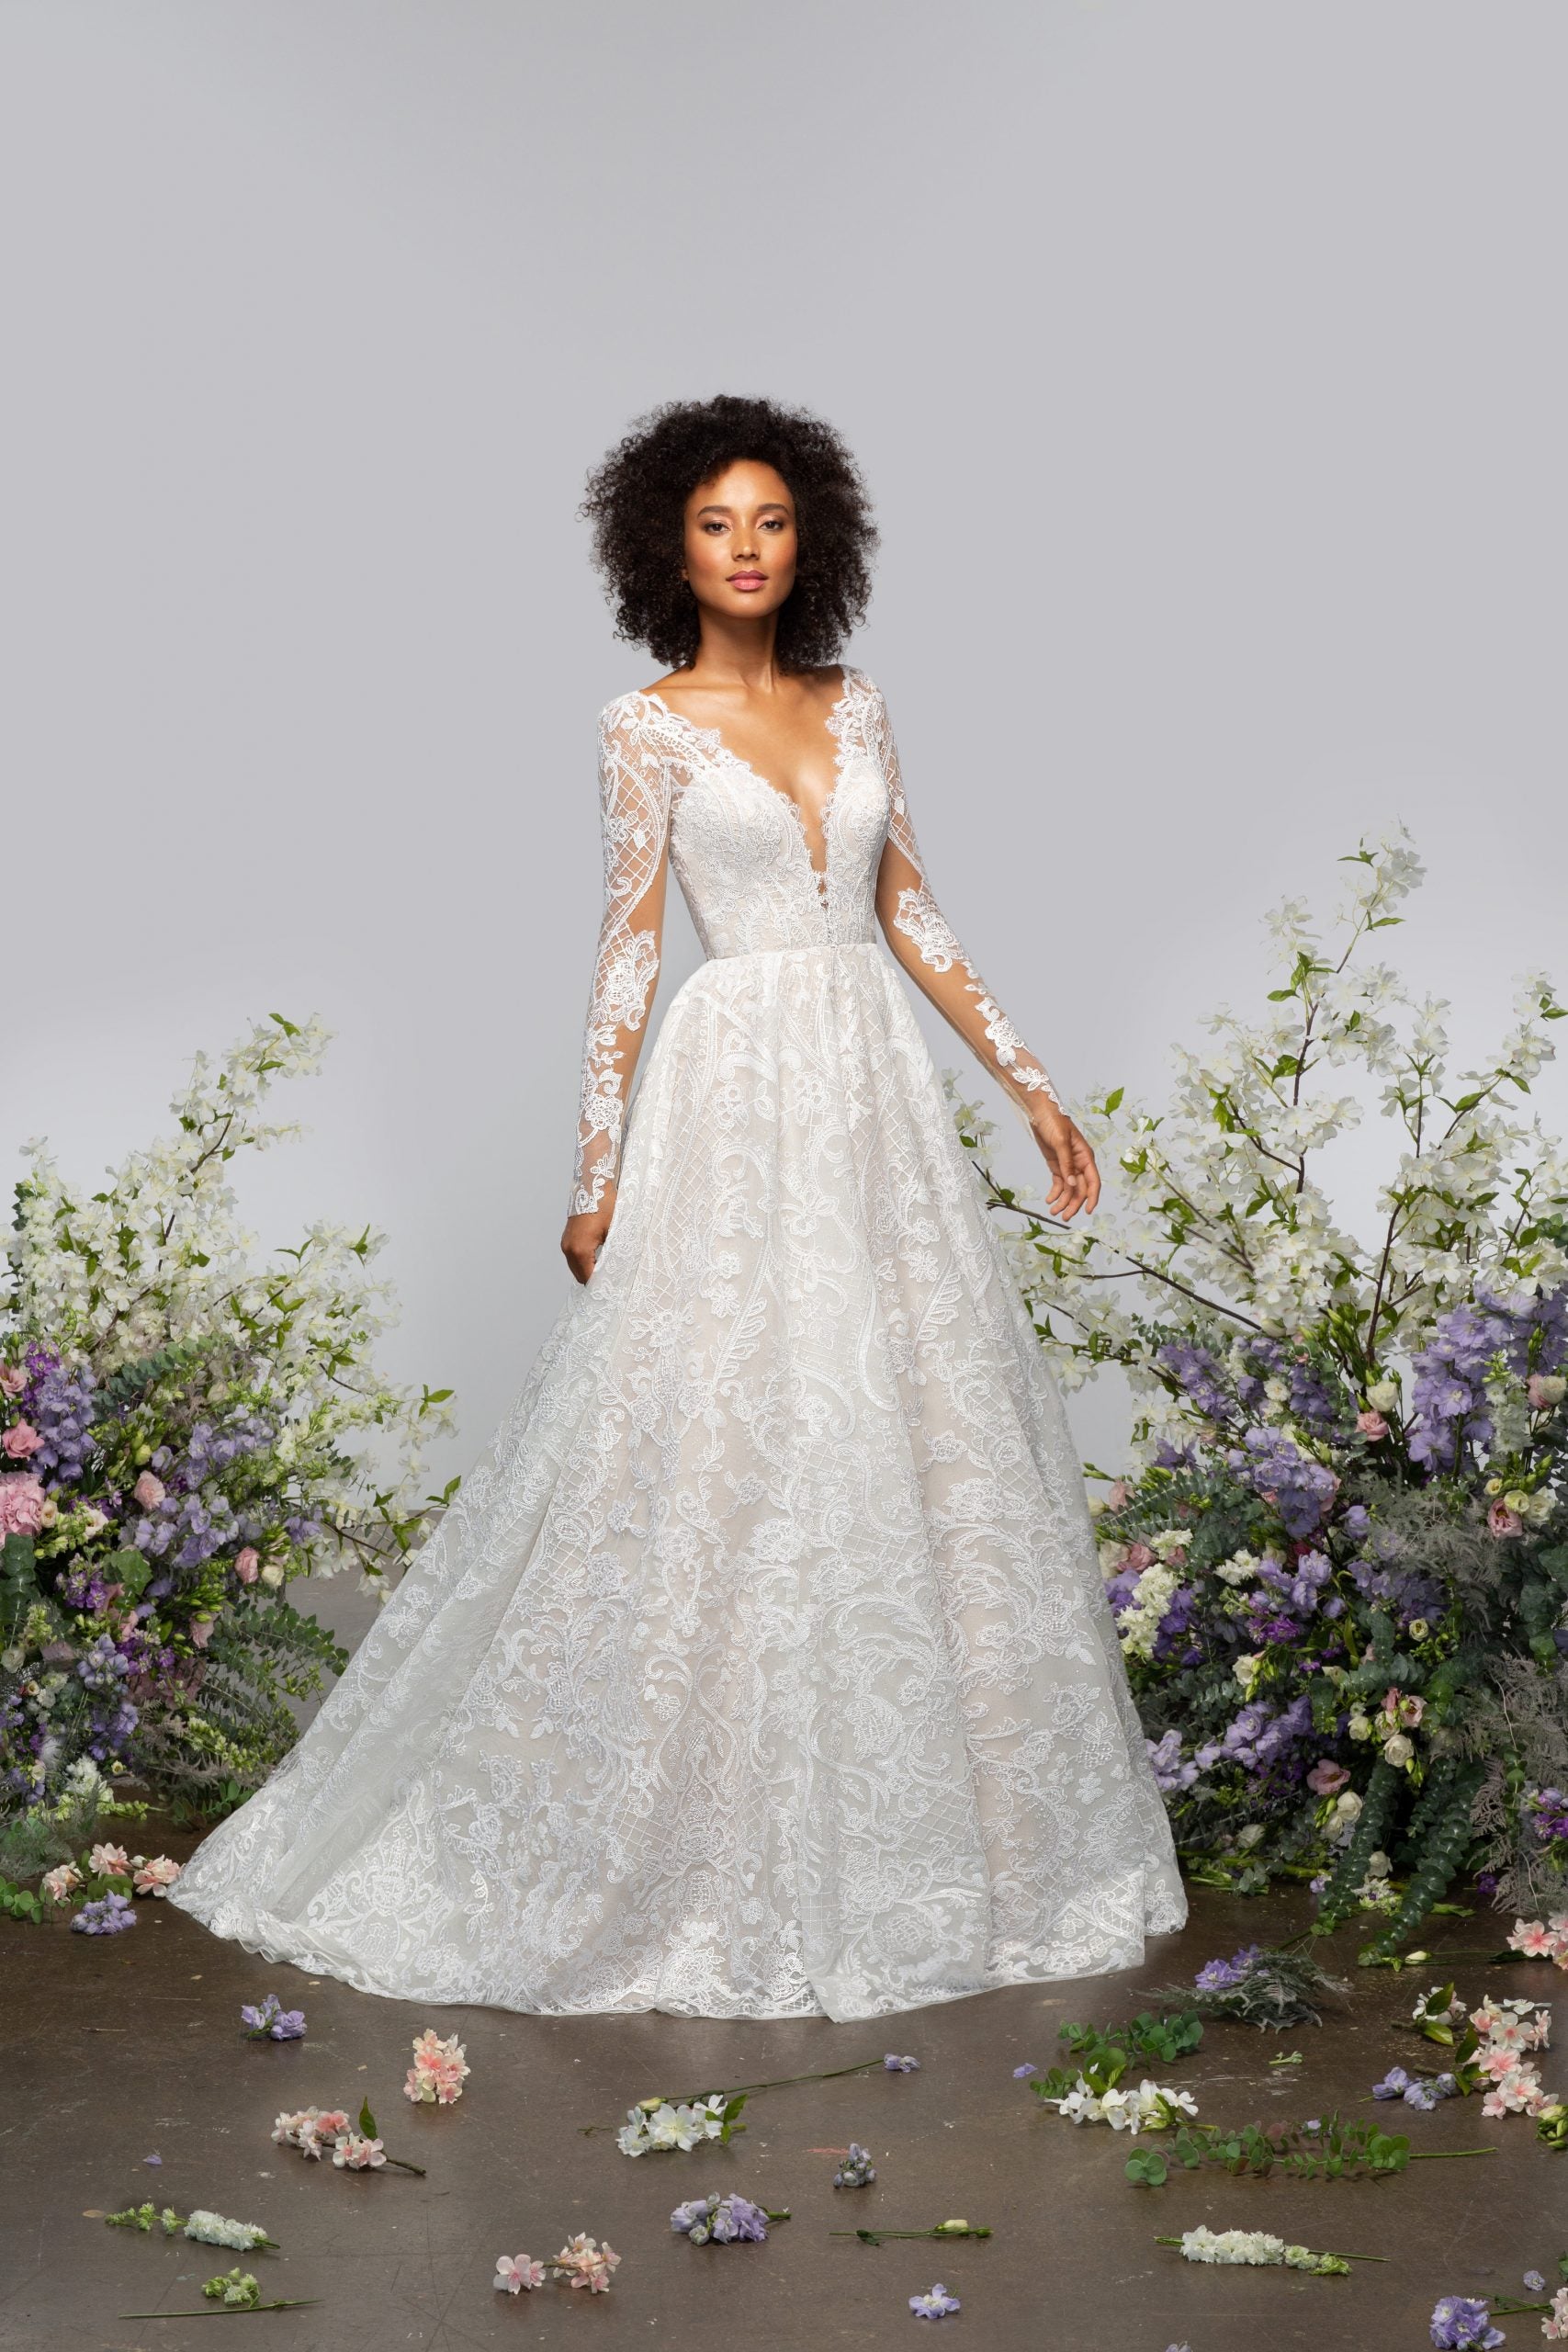 Lace Wedding Dress with Flower Accent